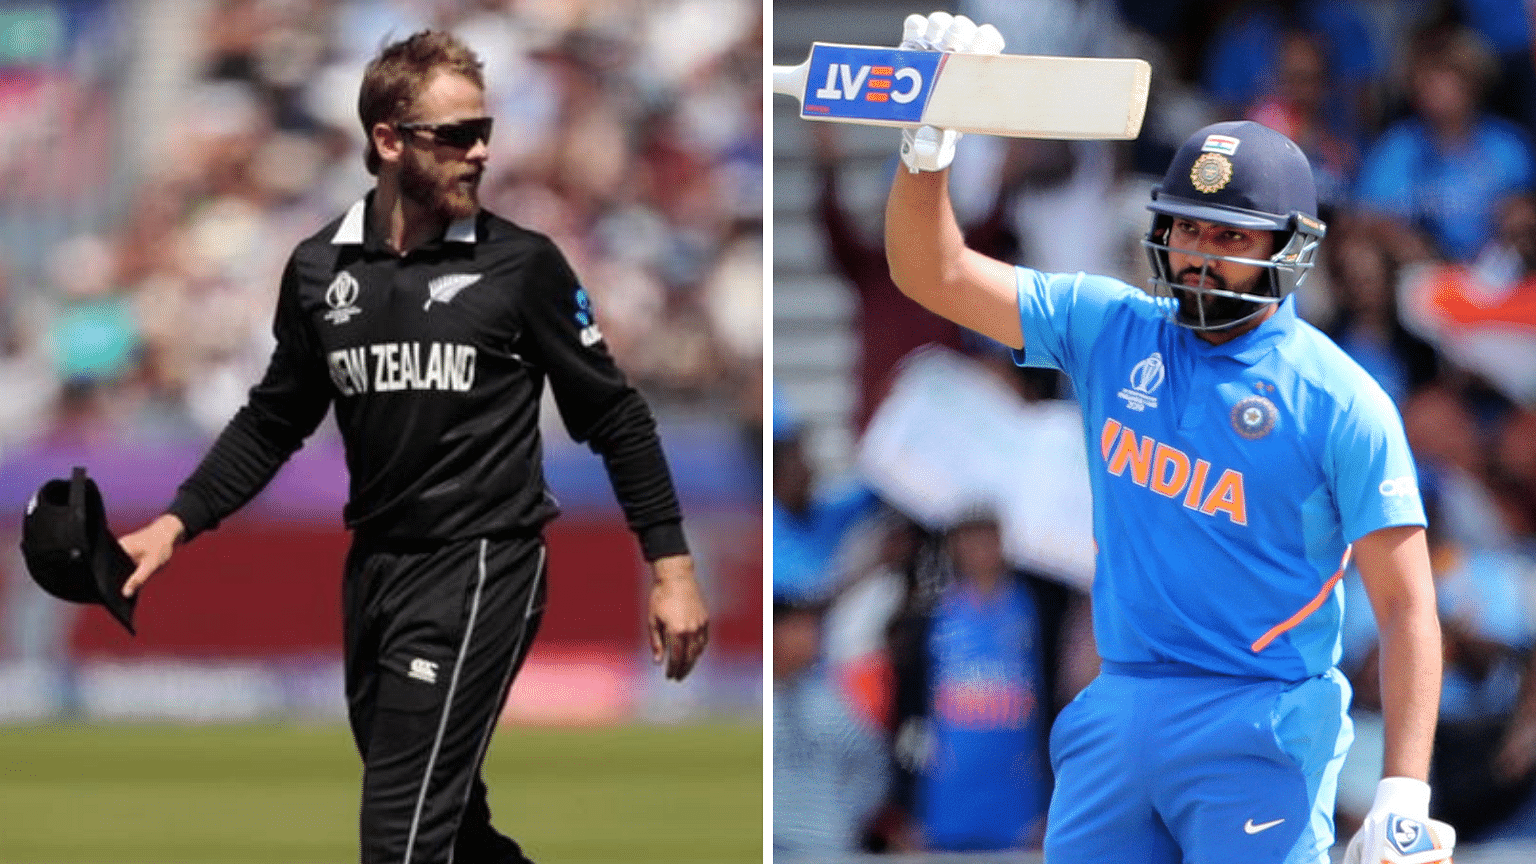 Indian batting is incomplete without mentioning the in-form Rohit Sharma, said New Zealand skipper Kane Williamson.